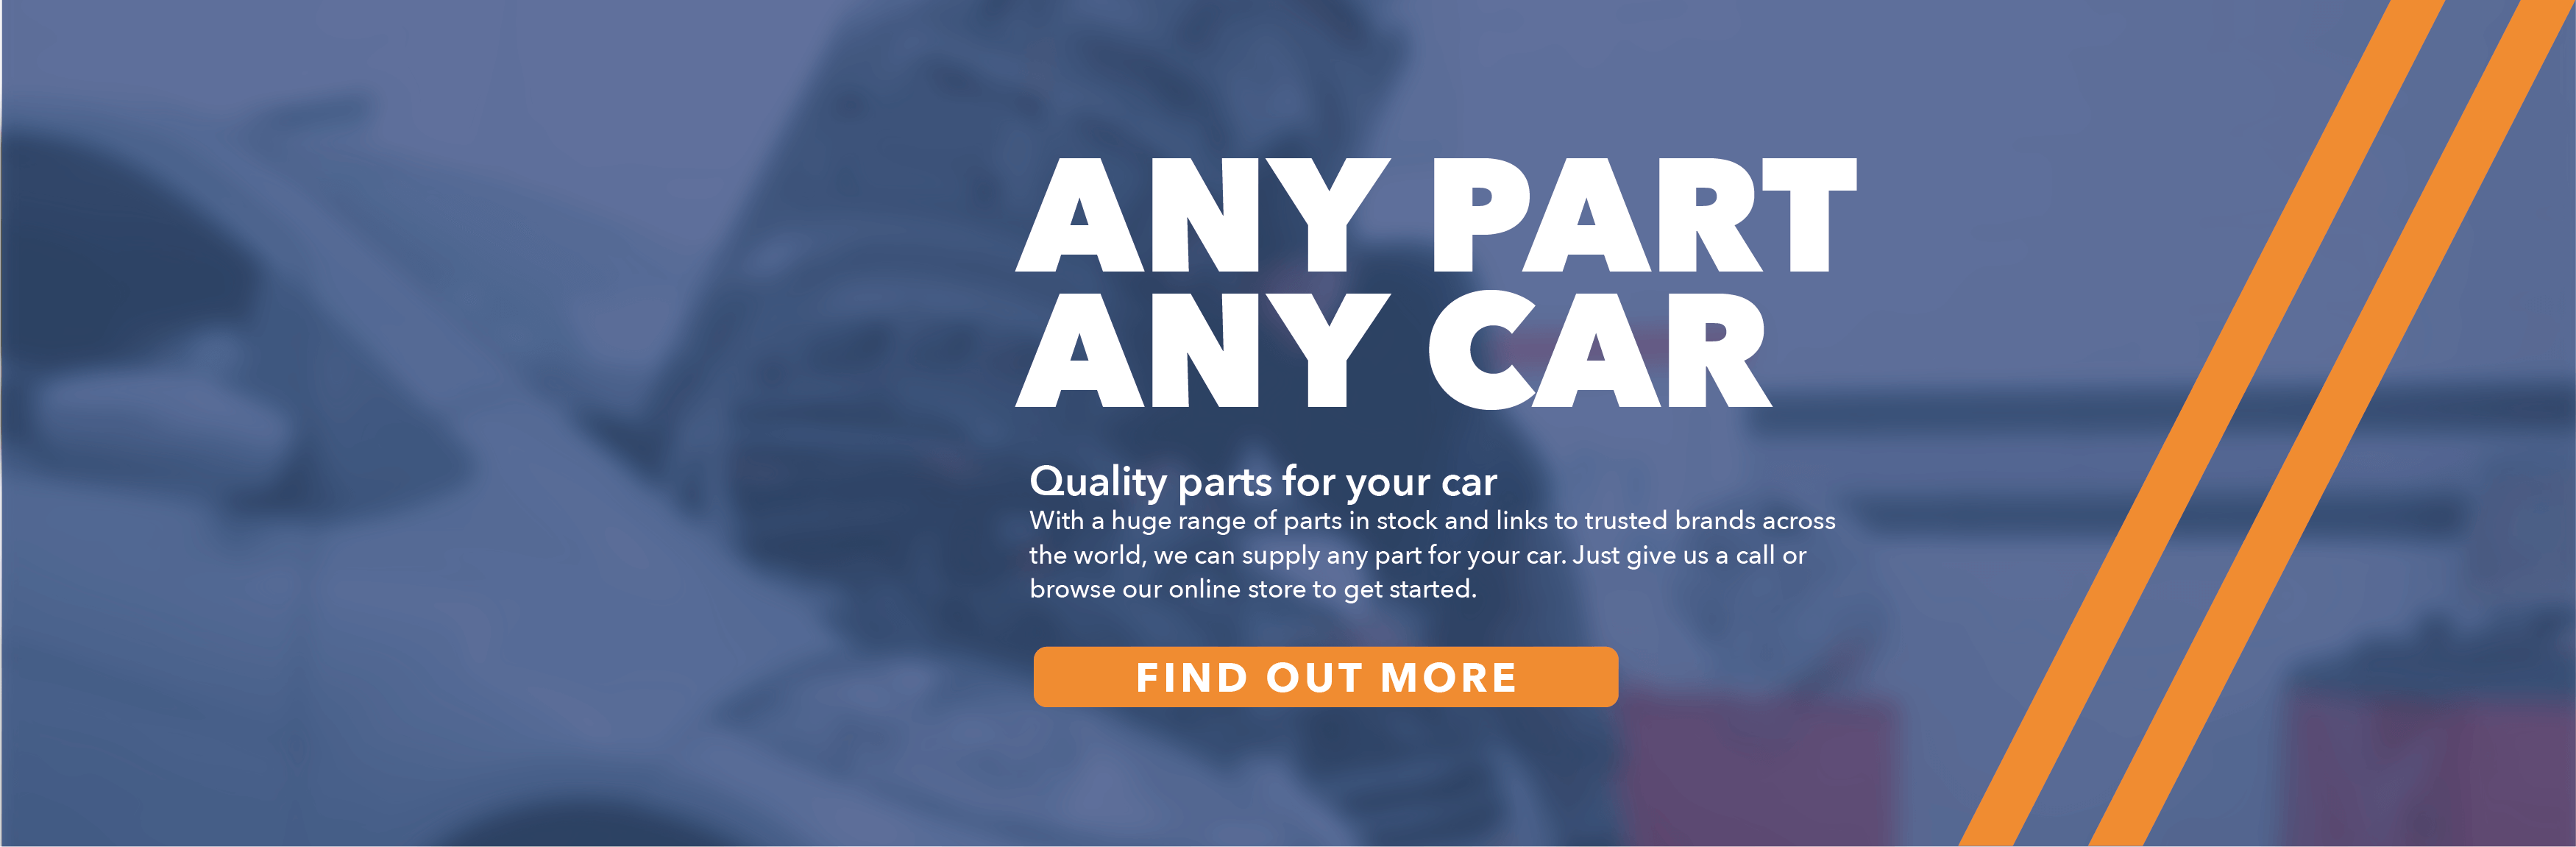 Autovaux Car Parts can supply any part for any car from our extensive range of stock online and in our warehosue.